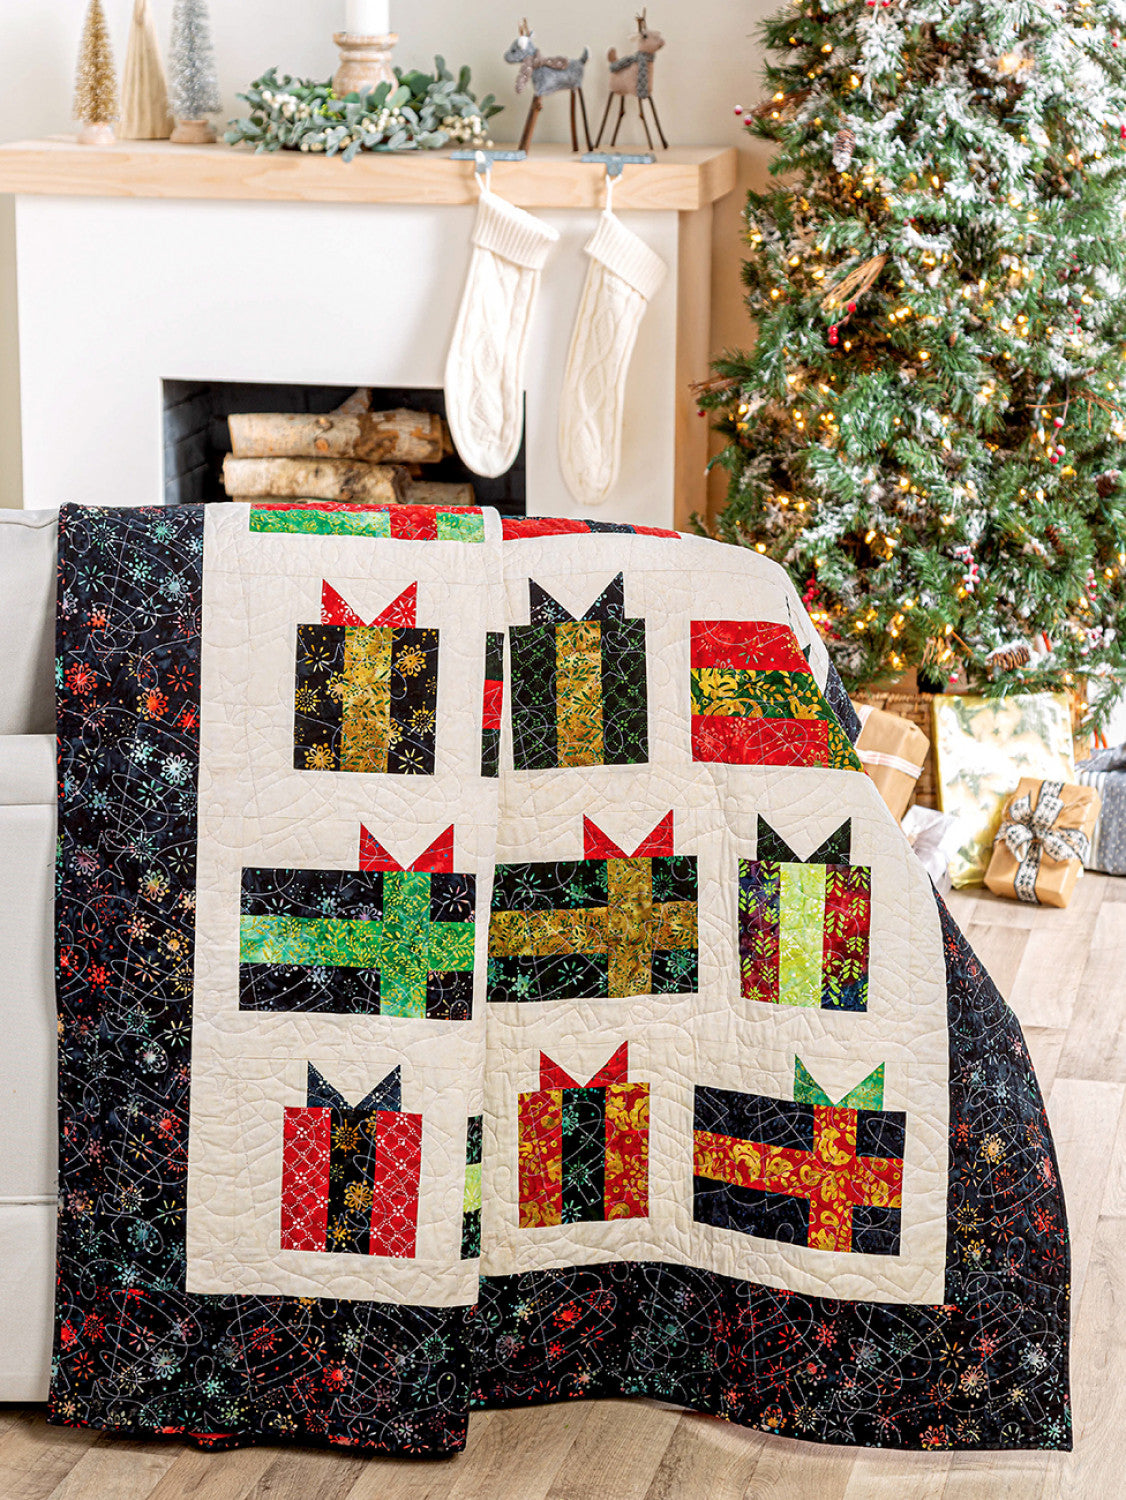 Jelly Roll Quilts for all Seasons - by Scott Flanagan